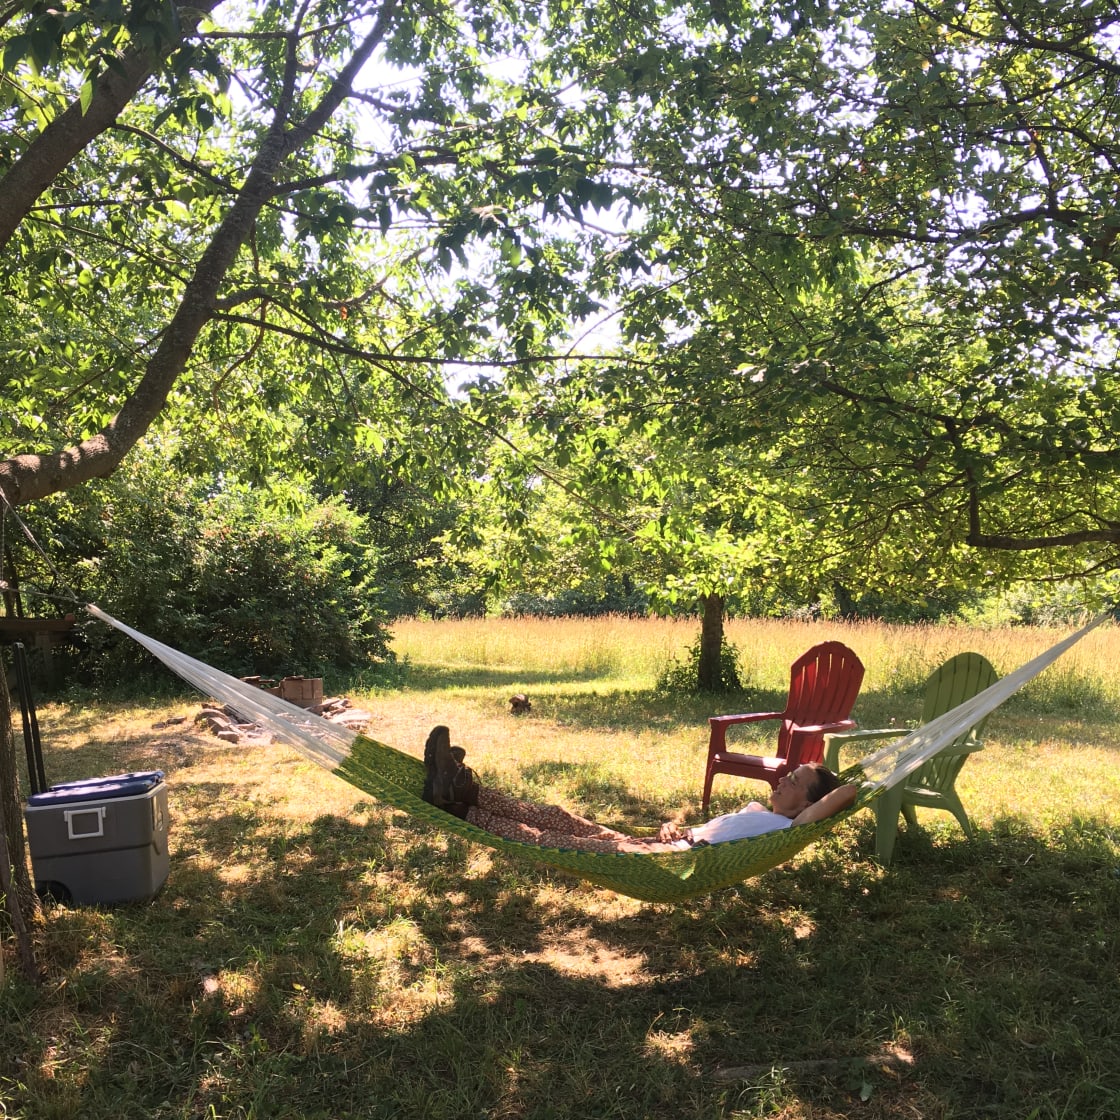 Our bee keeper relaxing at the campsite (BYO hammock)